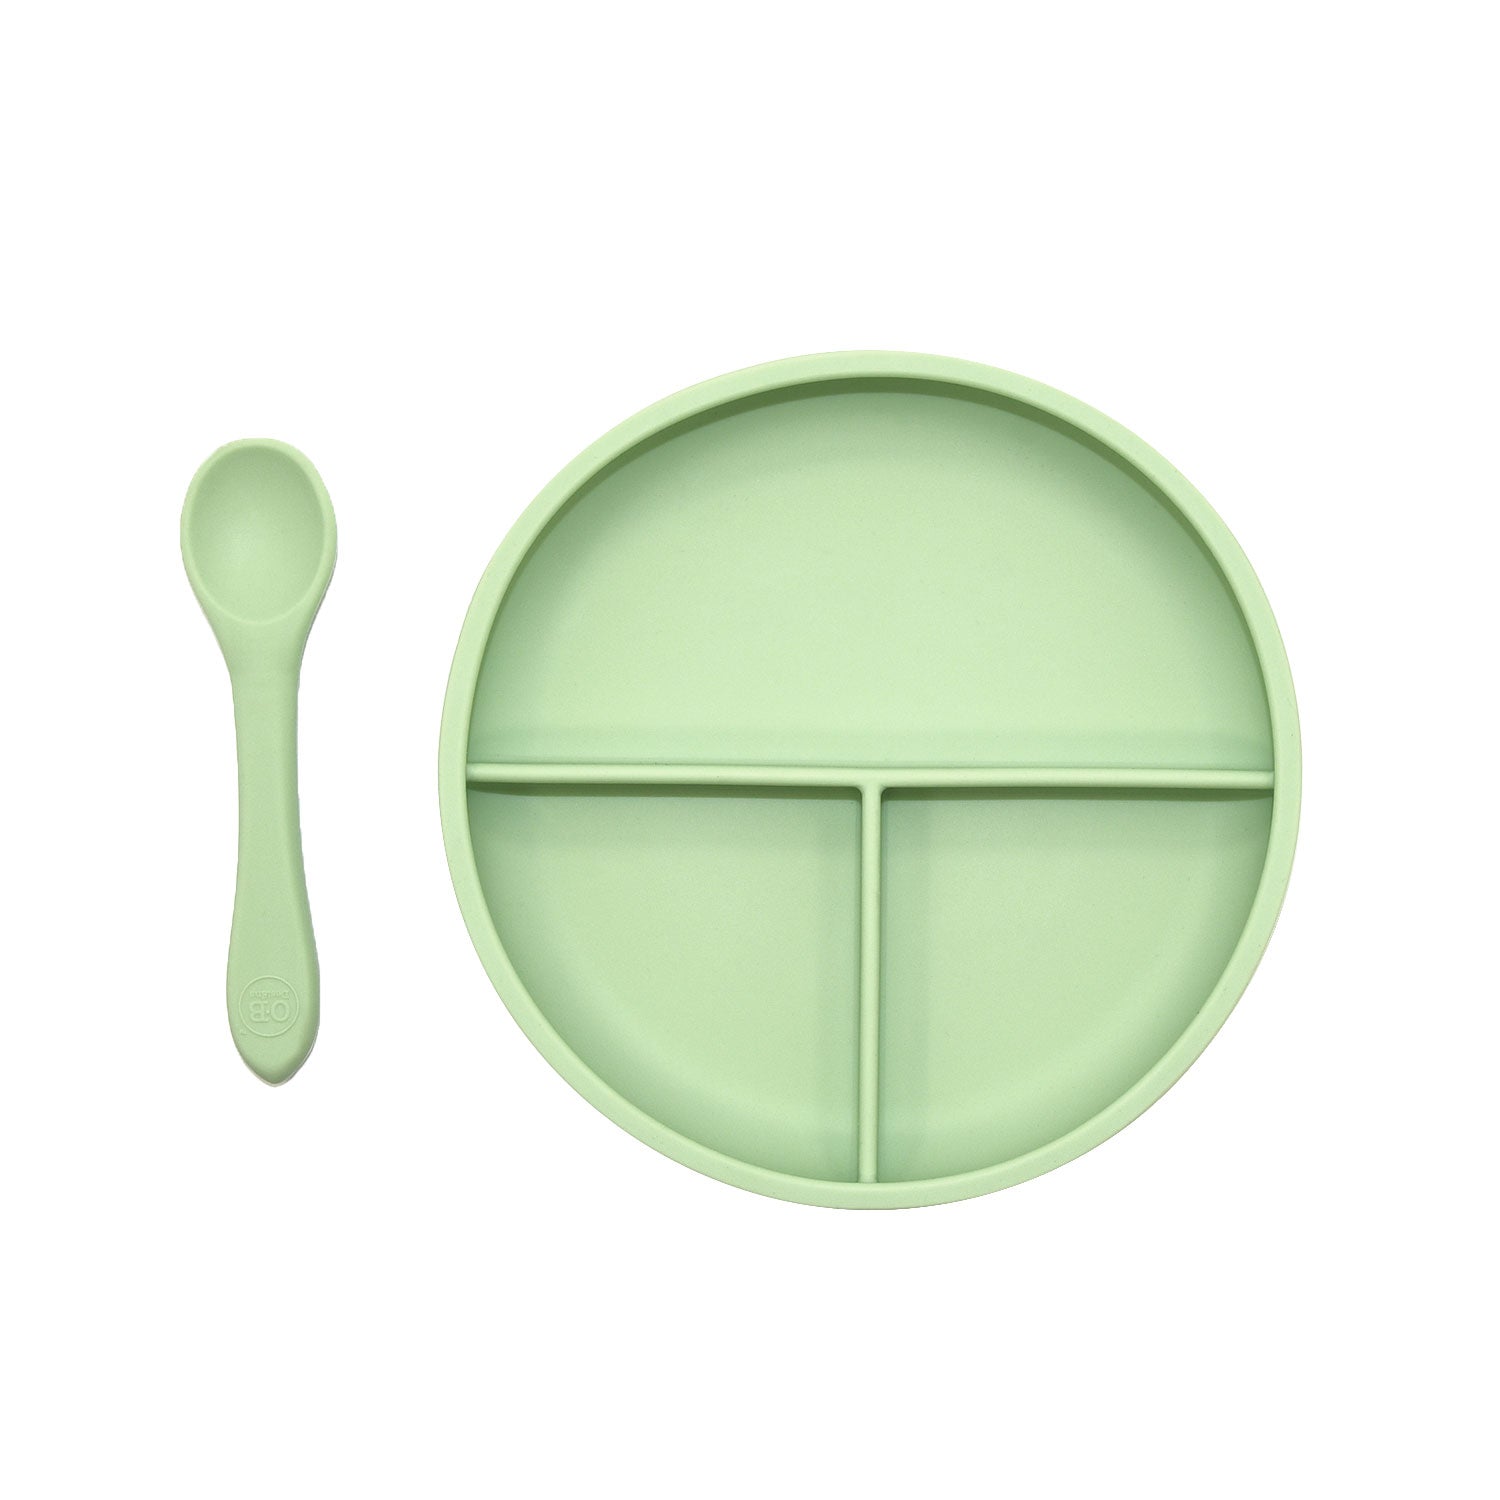 Silicone Suction Placemat Set - Set of 3